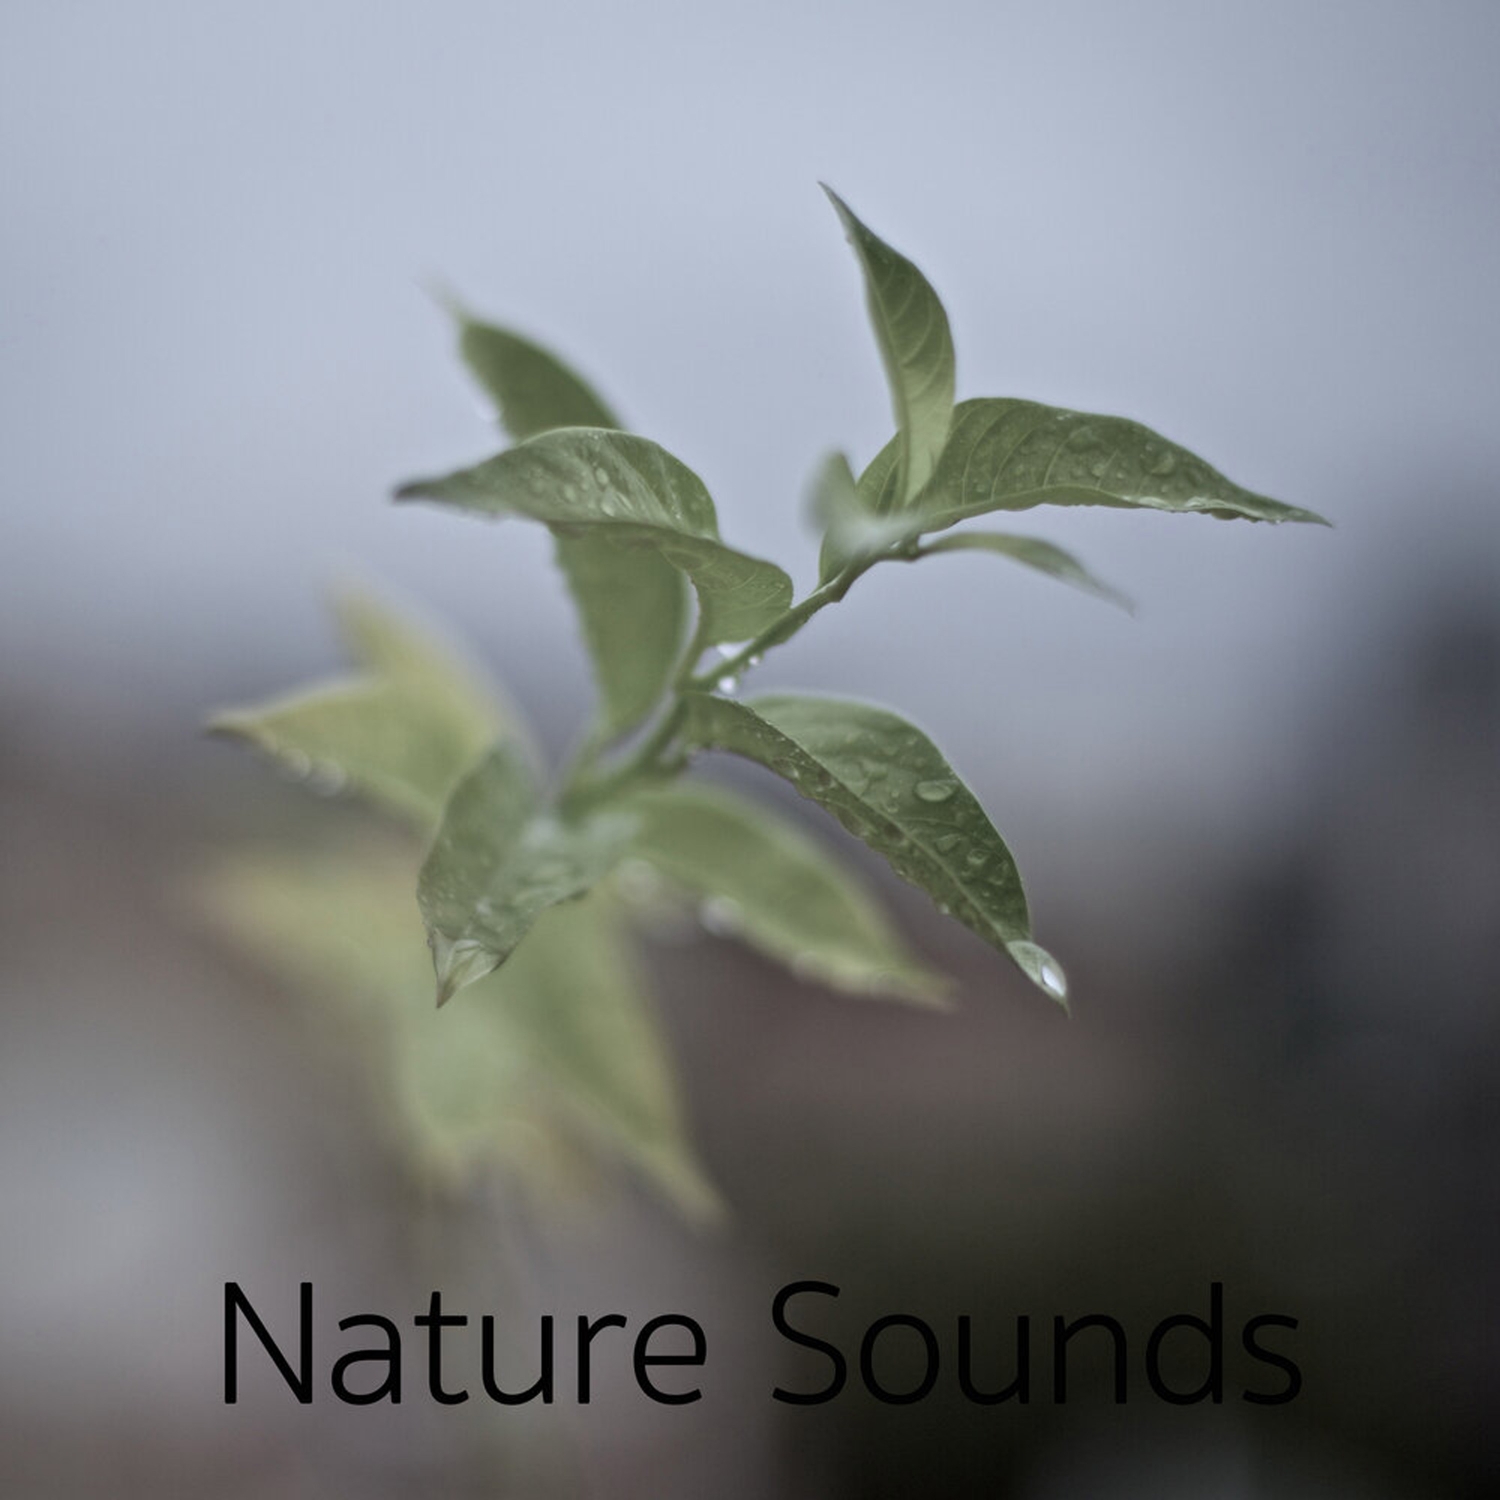 17 Nature Sounds to Loop - Rain and Water